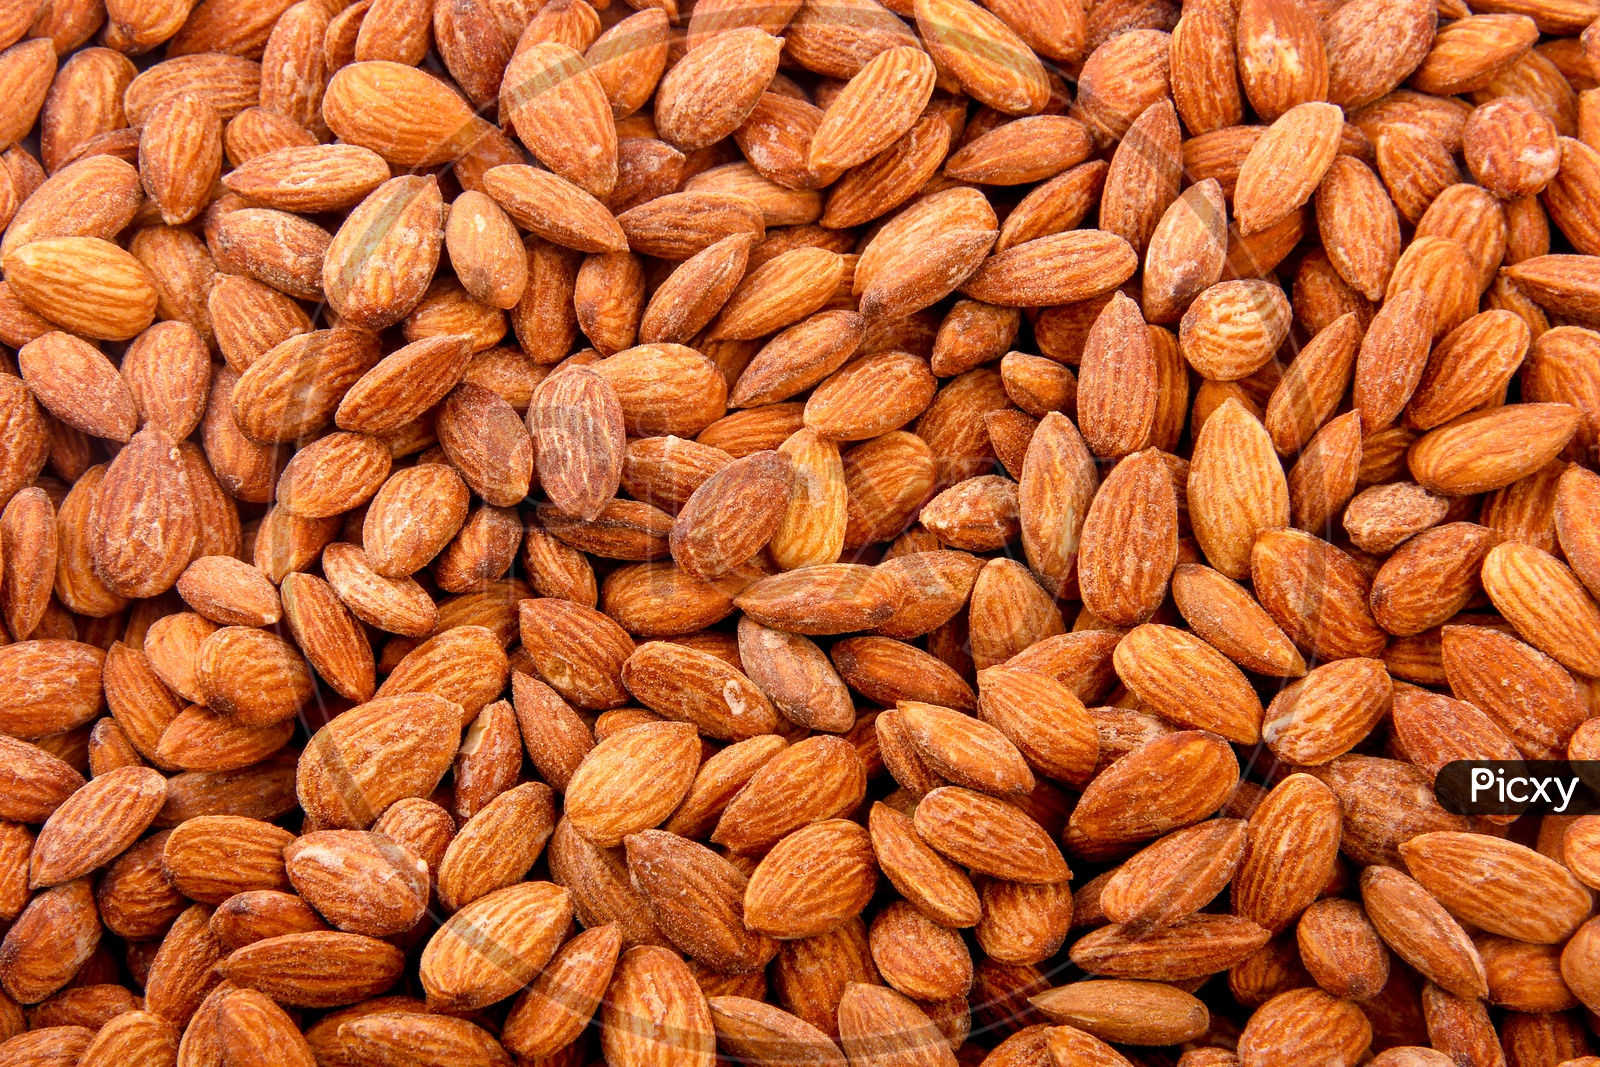 Almonds / Badam Composition Shot Forming a Background